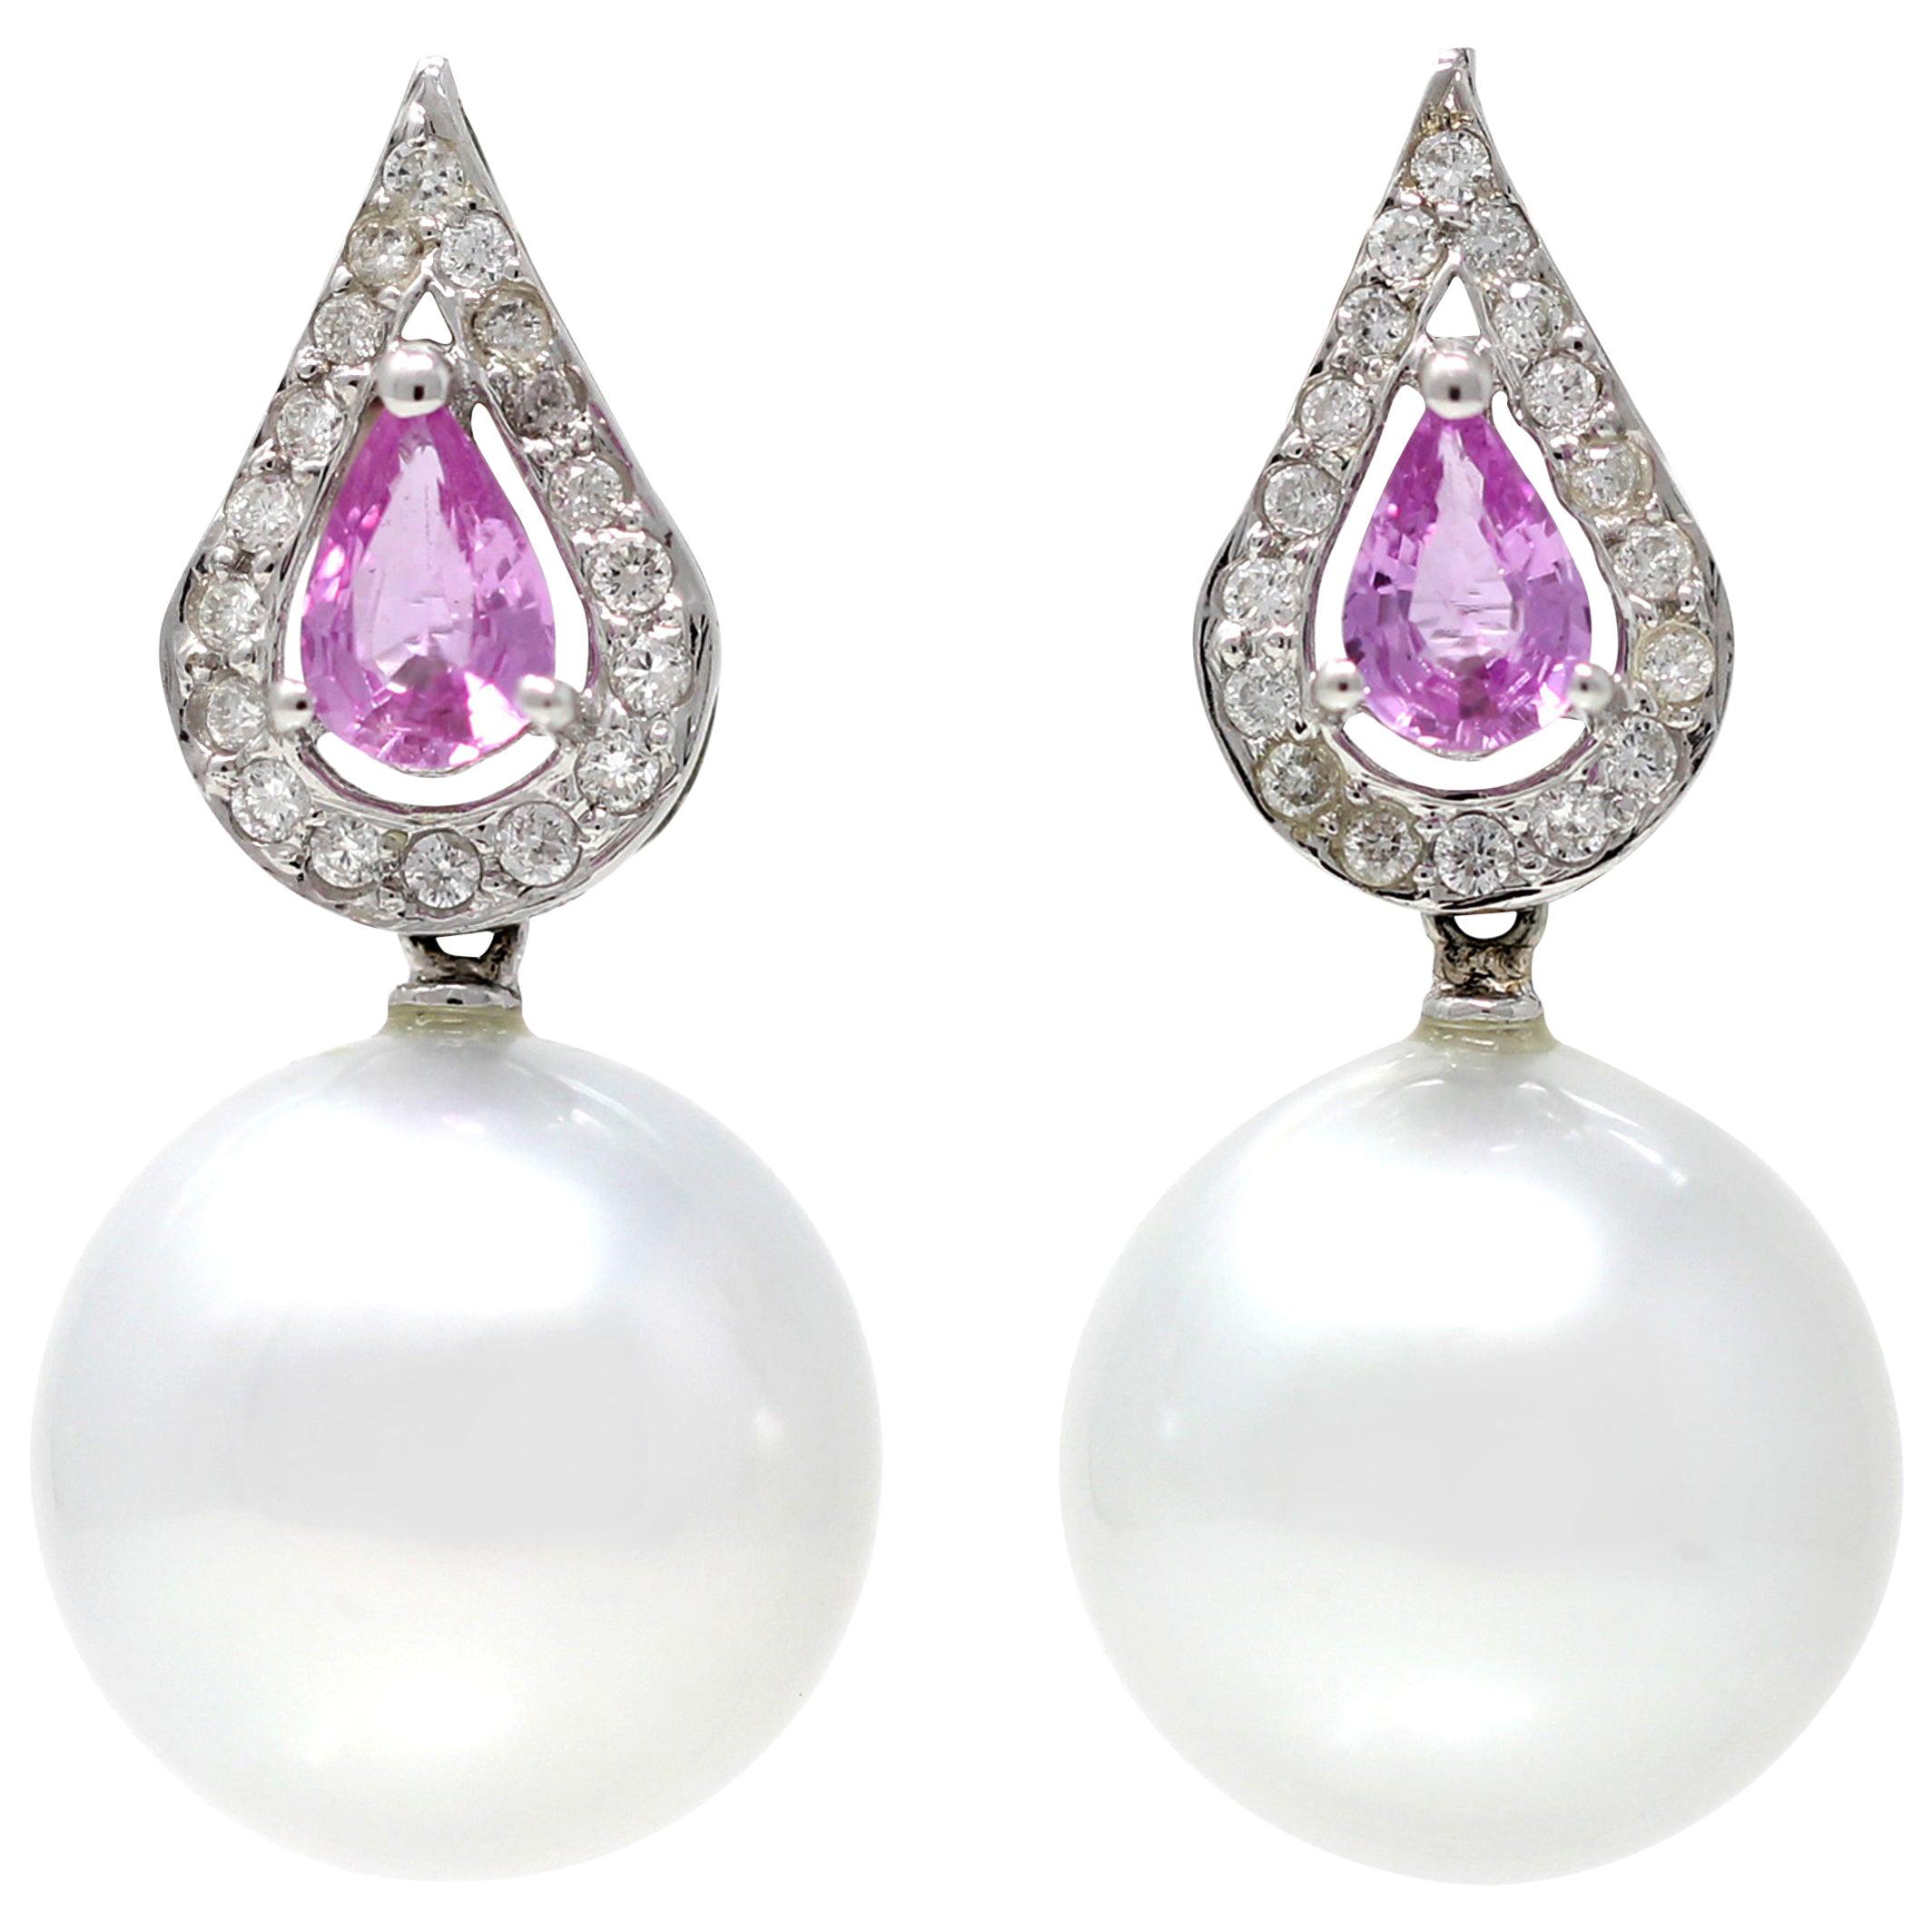 Pair of South Sea Pearl, Pink Sapphire and Diamond Earrings in 18 Karat Gold